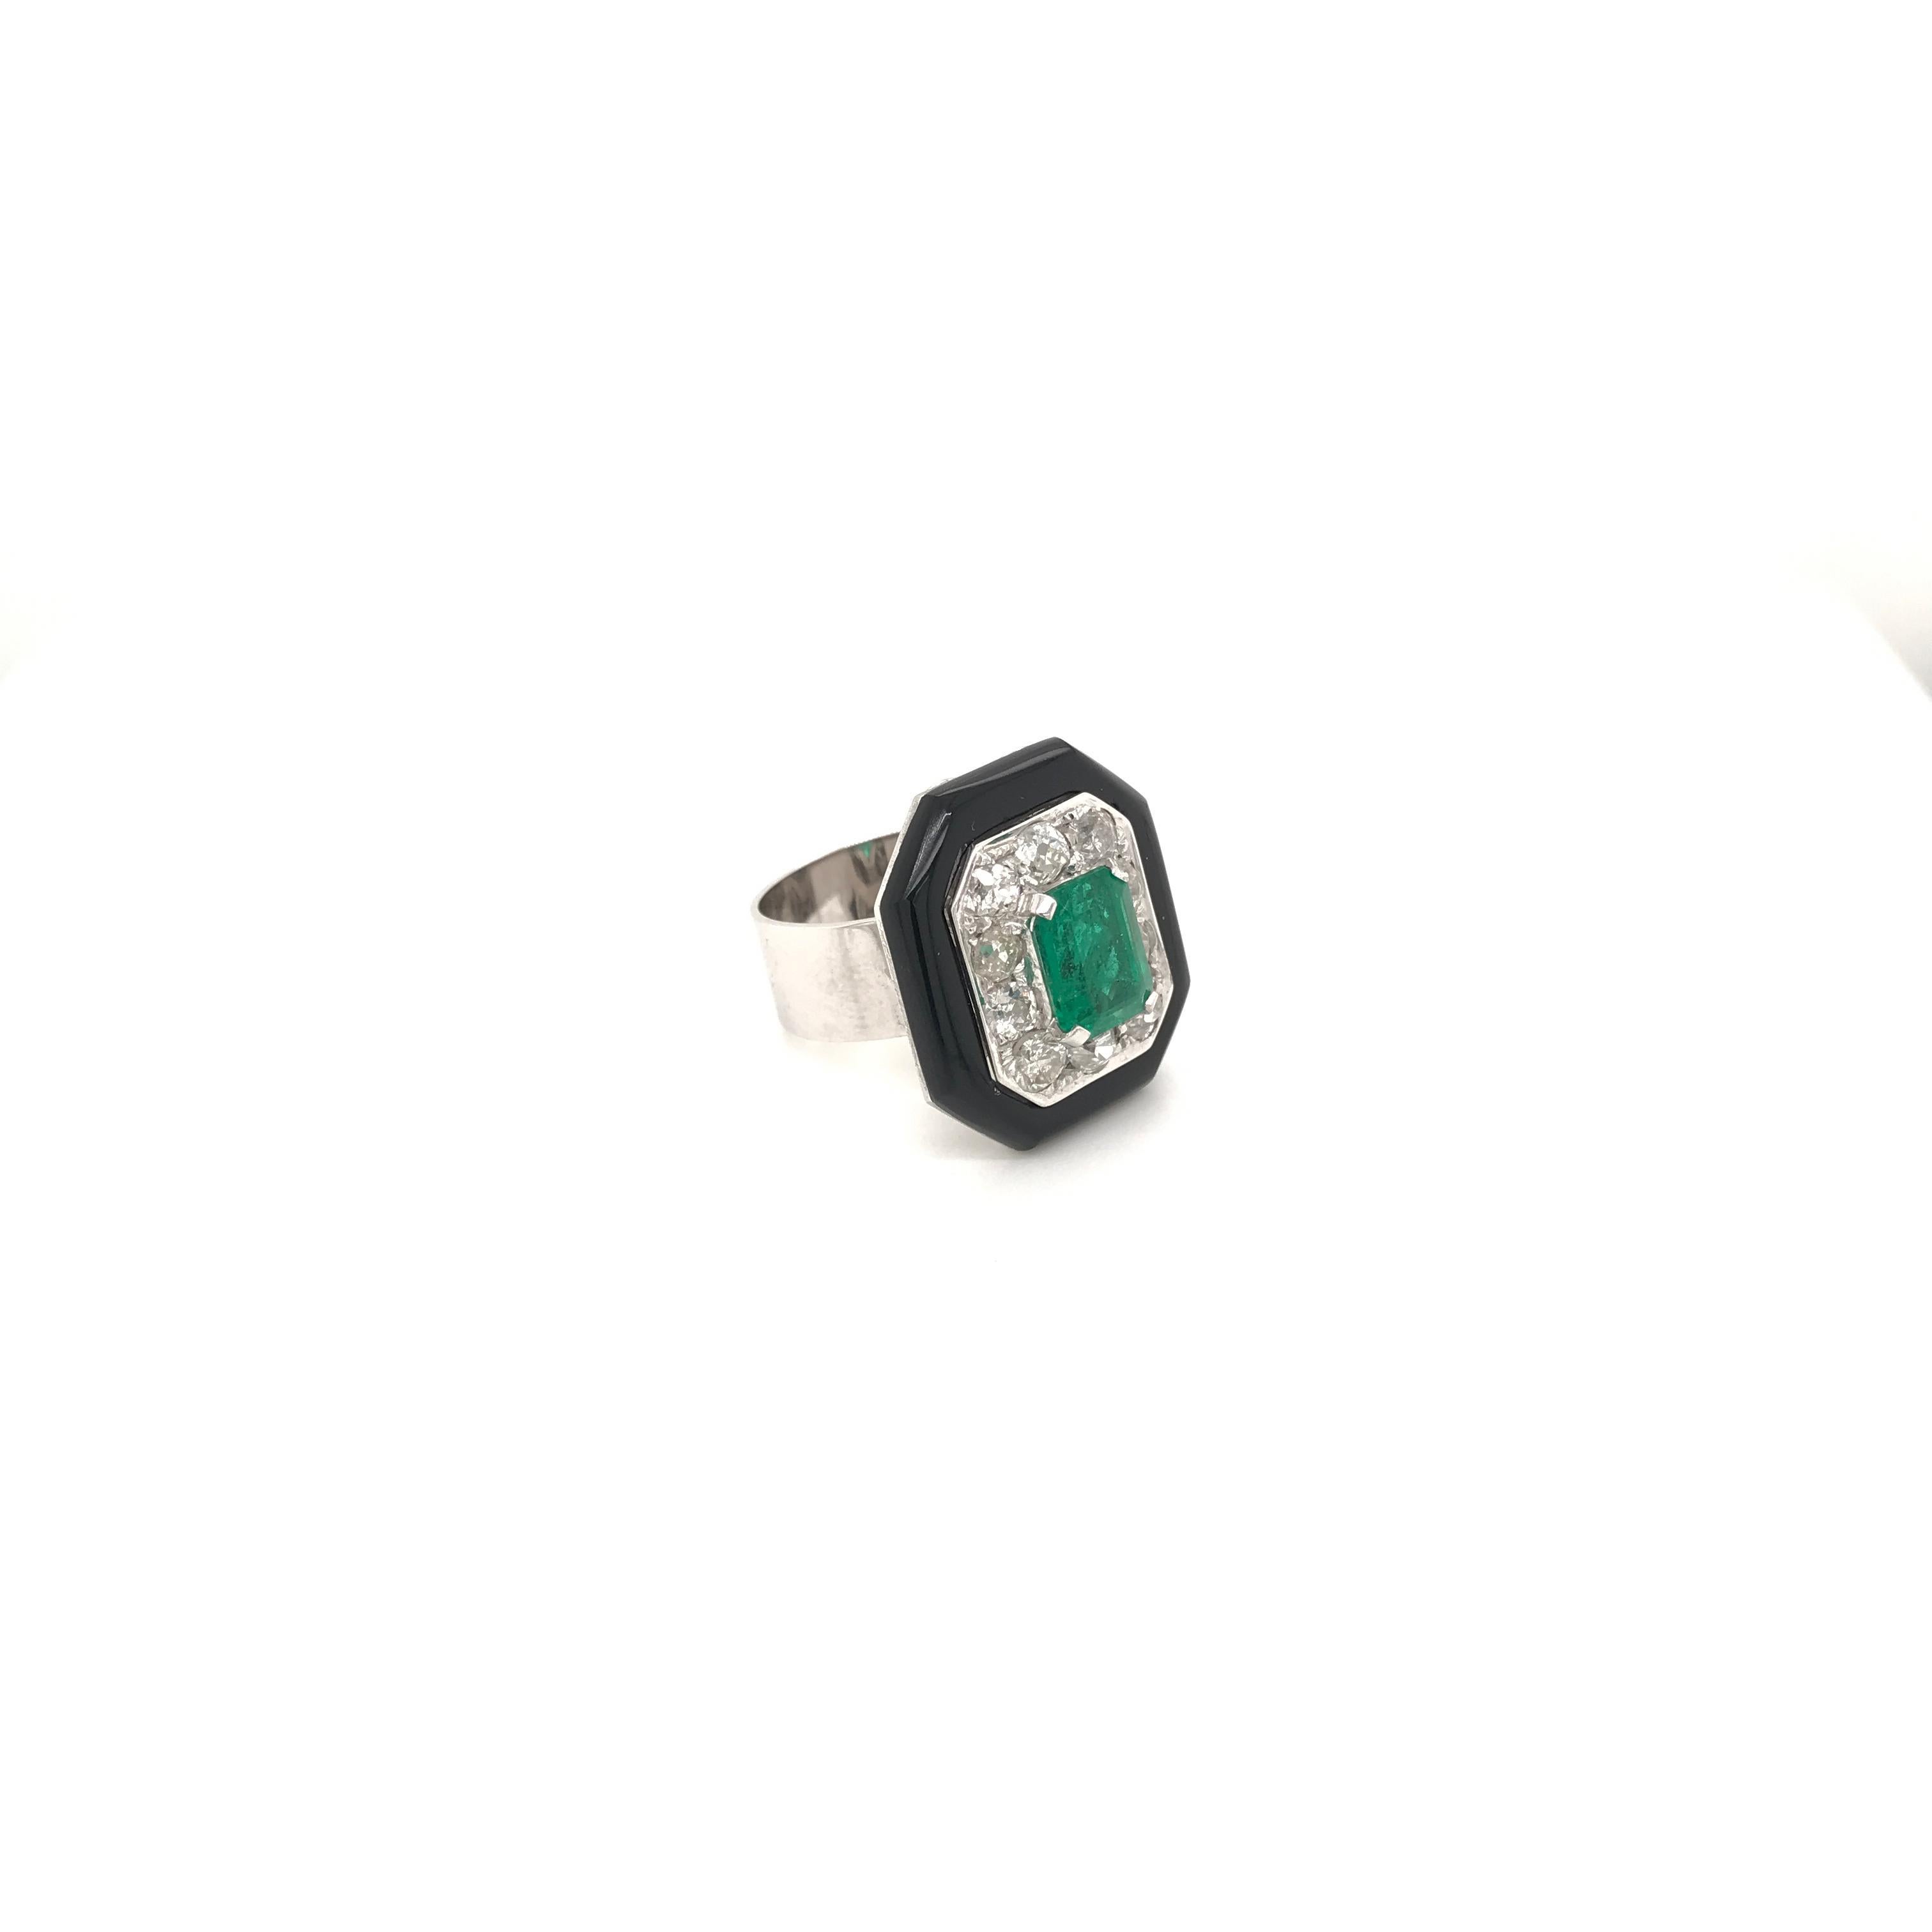 A beautiful Art Deco 18k white Gold ring, featuring a 2.10 carat Natural Vivid Green Colombian Emerald, surrounded by 2.00 carats of sparkling Old MIne Cut Diamonds graded G/H color vvs2, in a custom-cut onyx square frame.

CONDITION: Pre-owned -